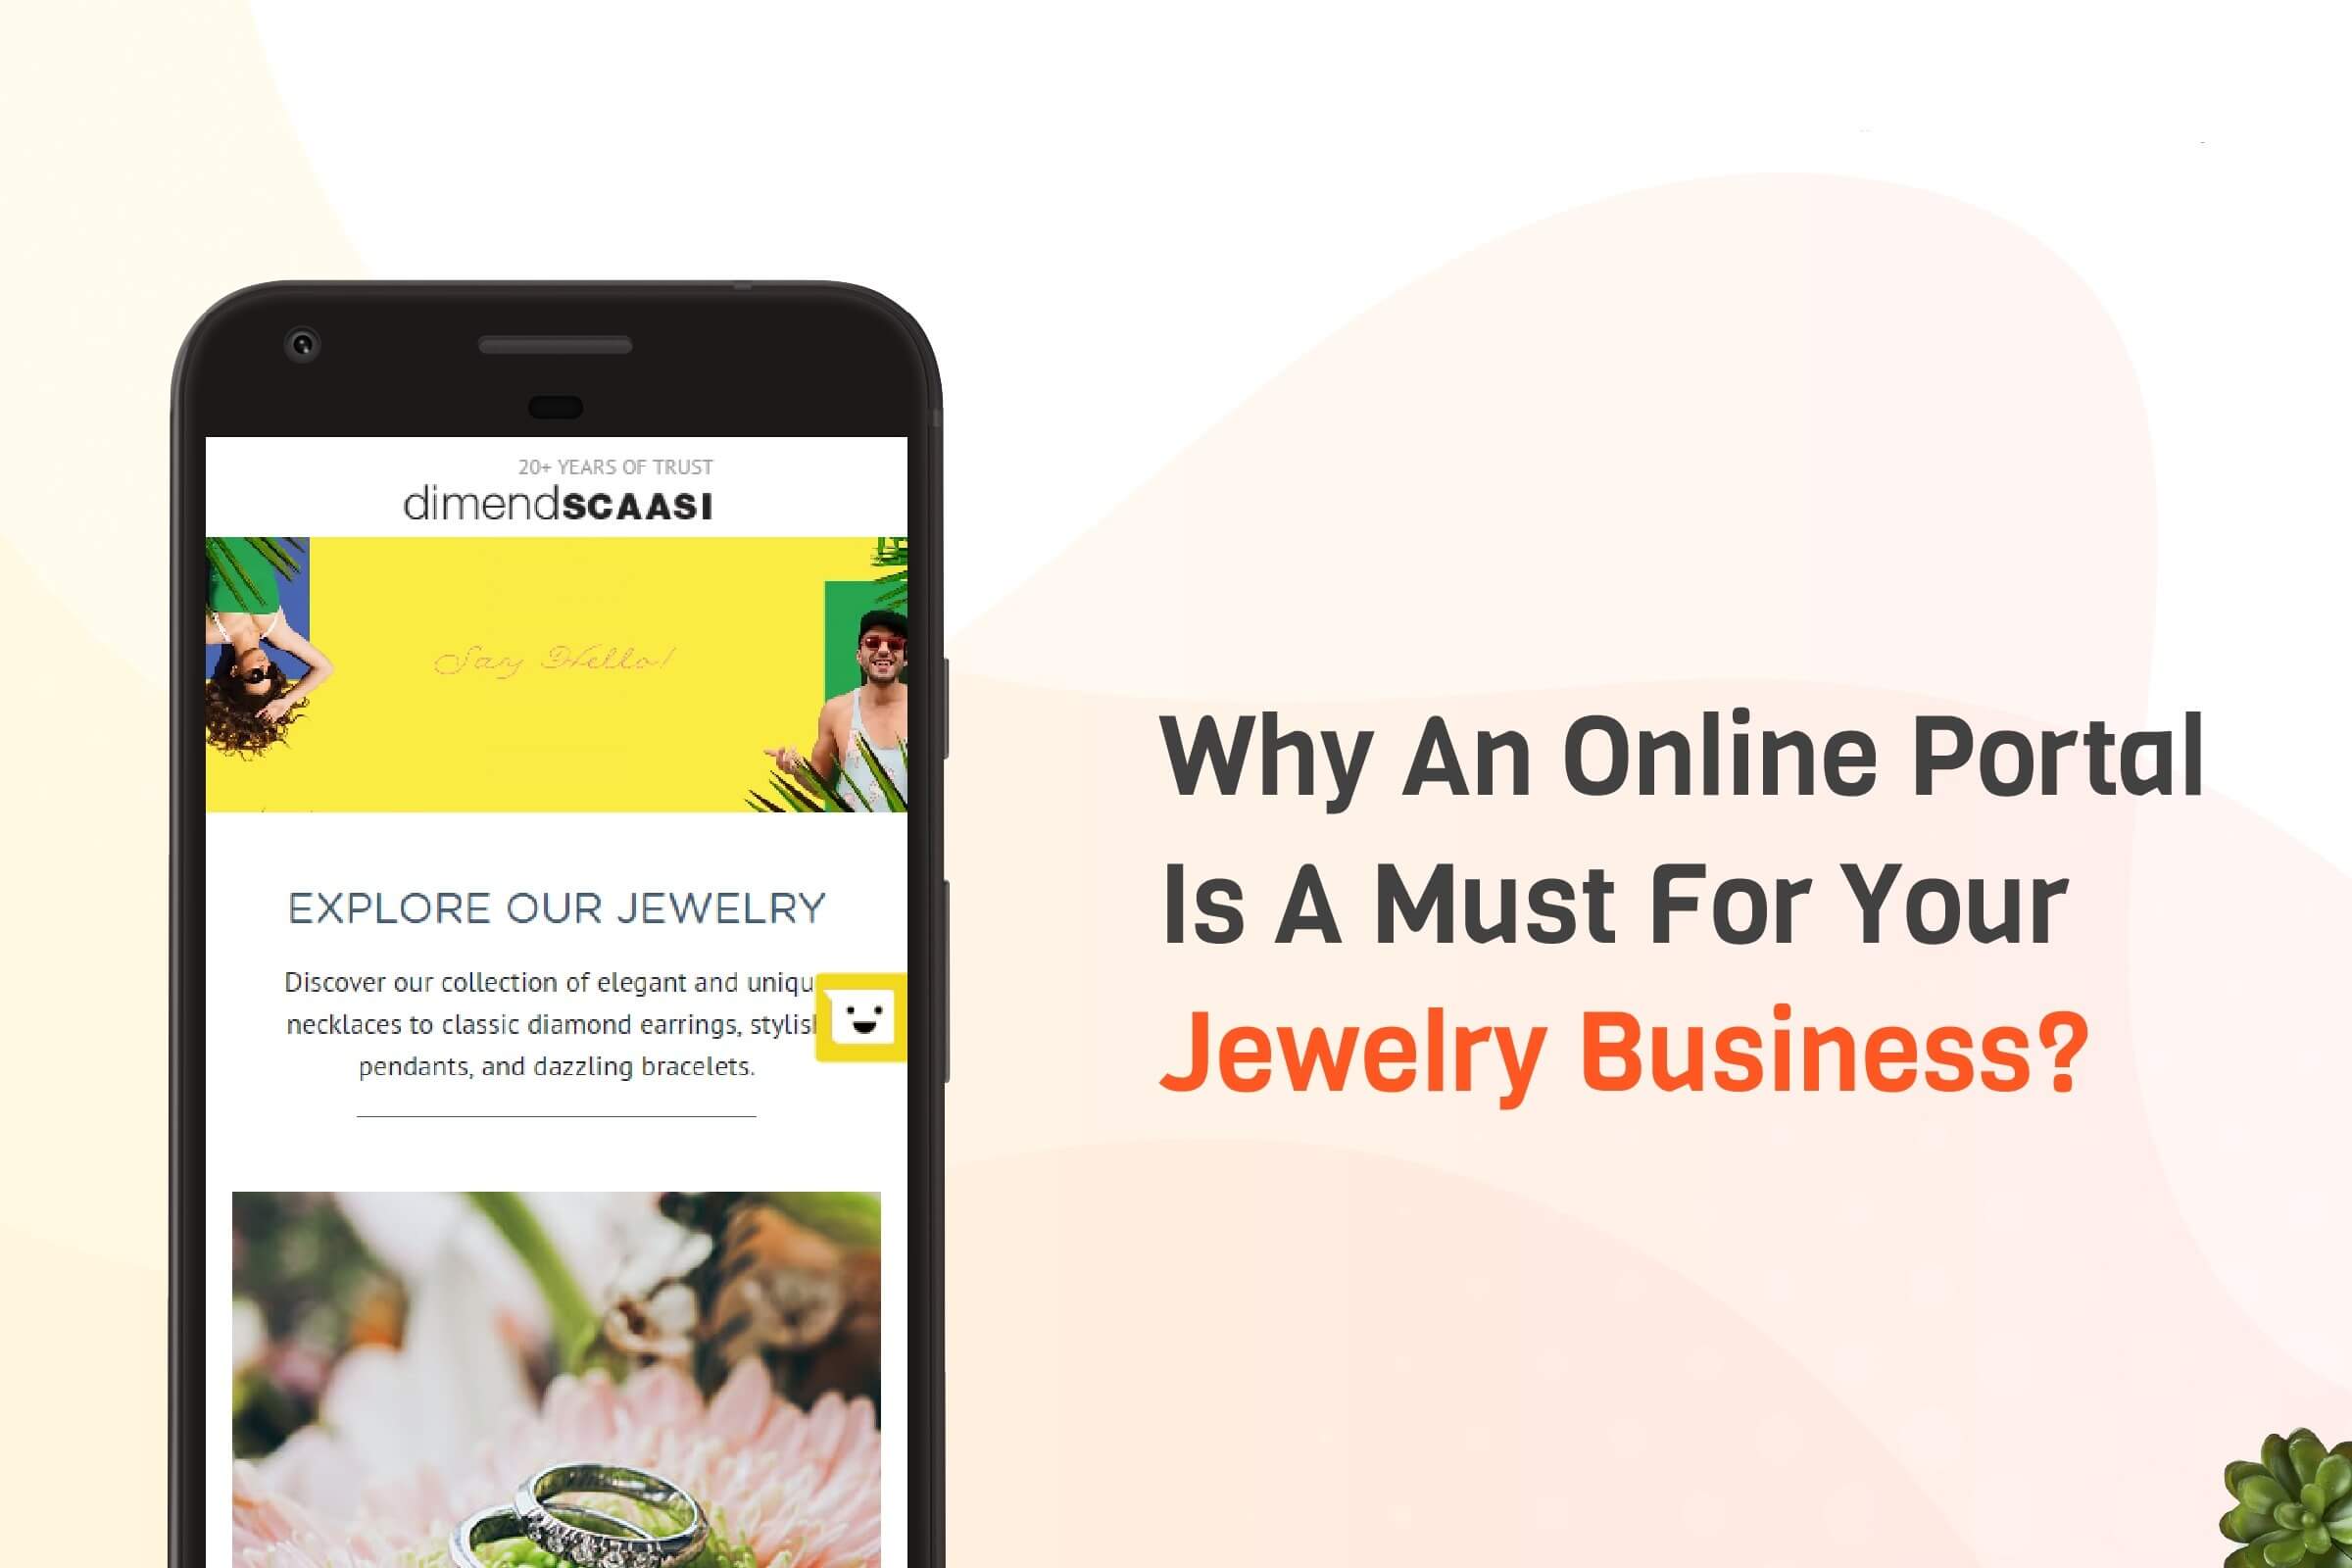 Why An Online Portal is A Must For Your Jewelry Business?